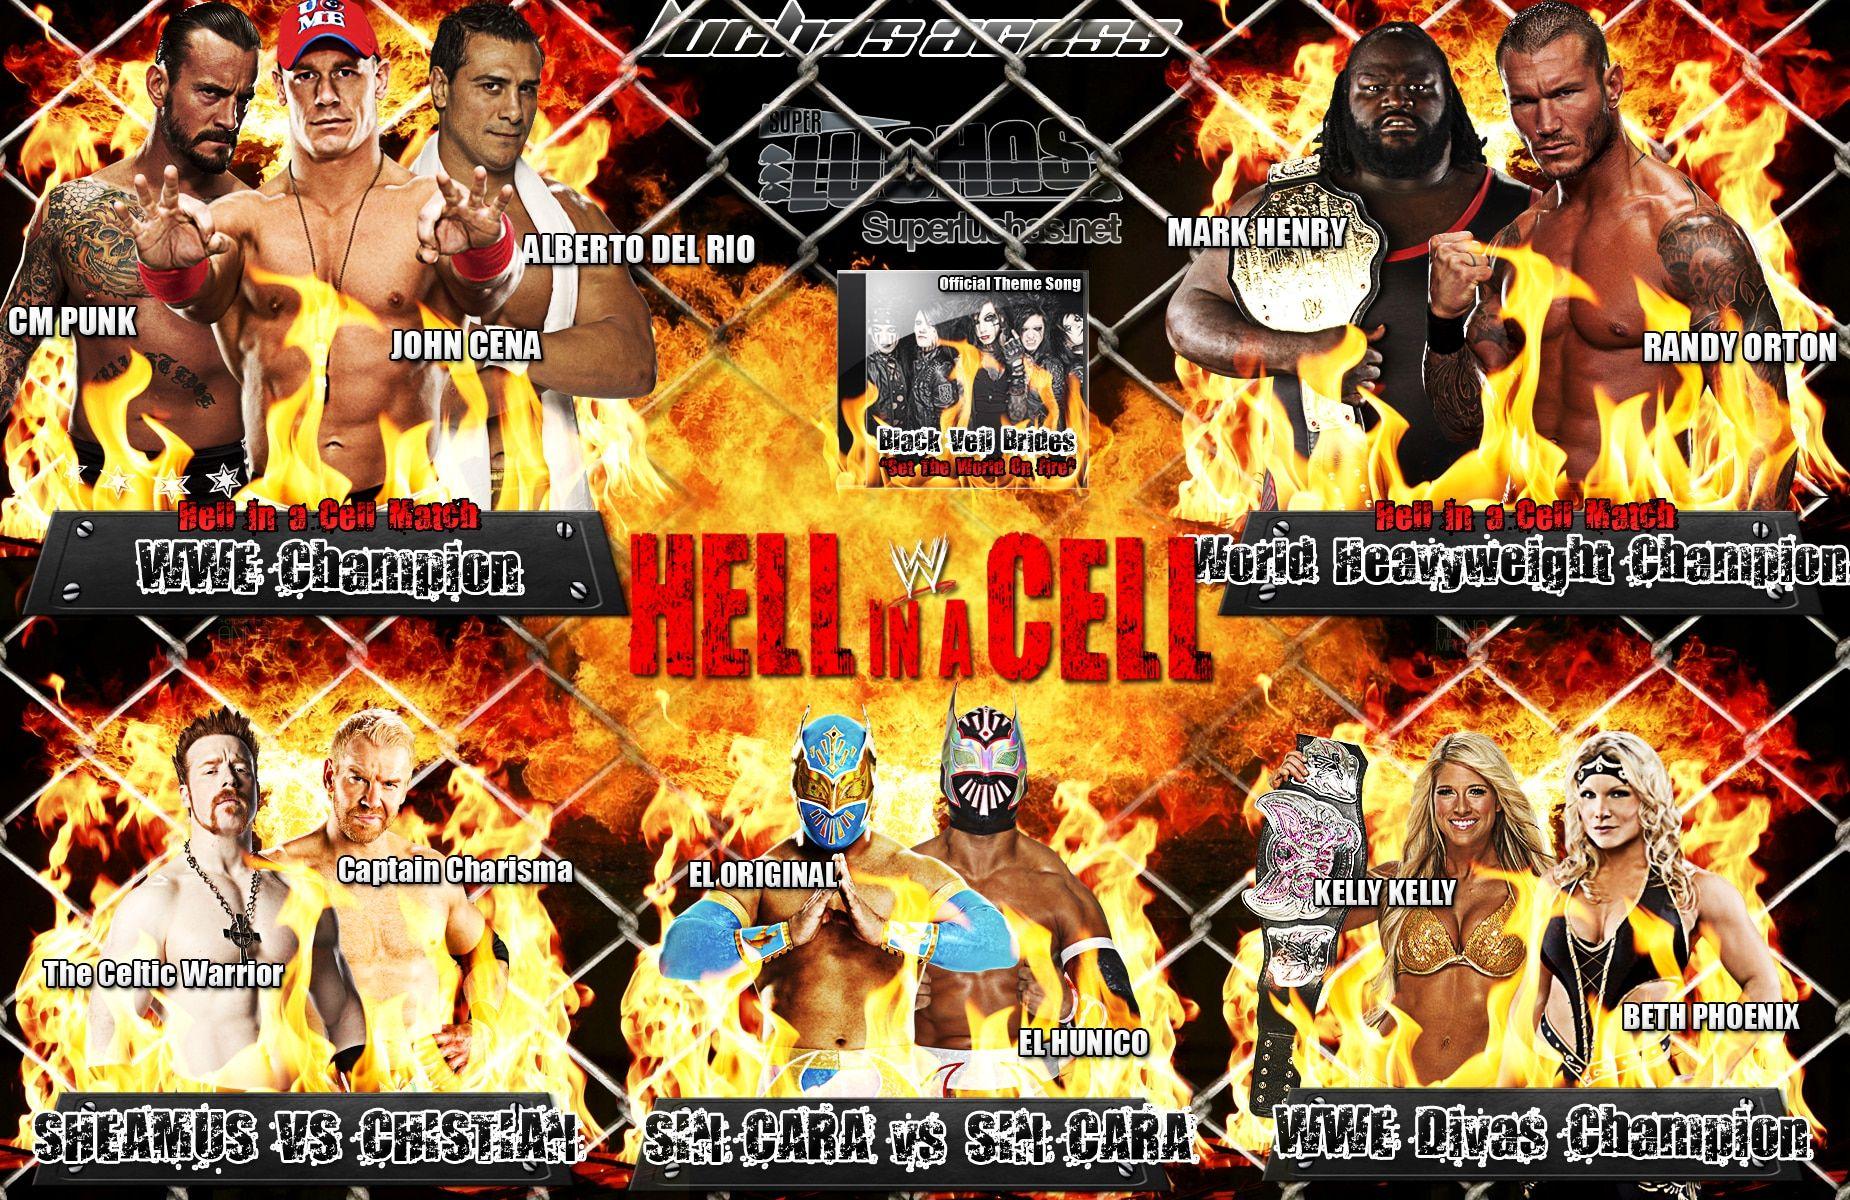 Wallpaper: Cartel del PPV WWE Hell in a Cell 2011